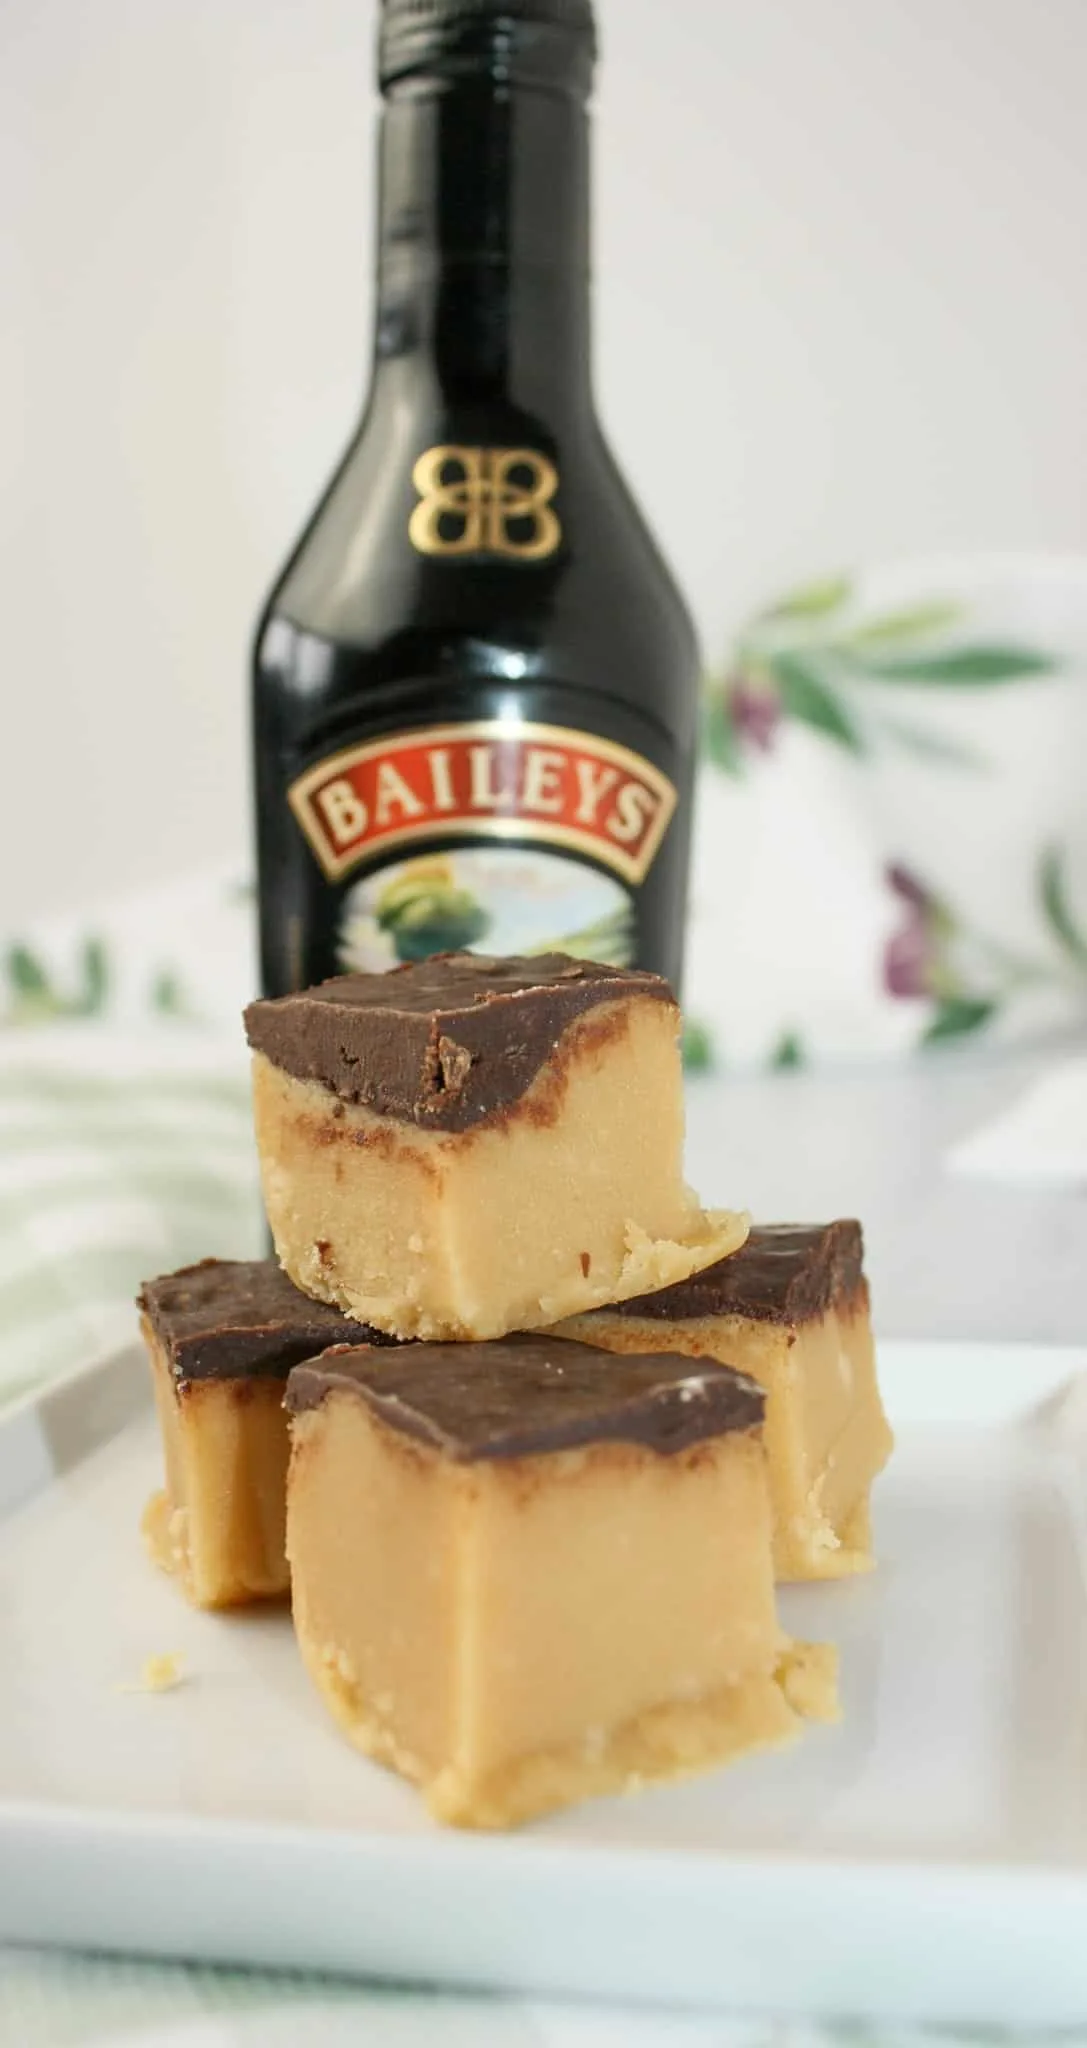 Irish Cream Fudge is a creamy, decadent treat that will earn you rave reviews.  This easy recipe does not require a candy thermometer and can be made in minutes.